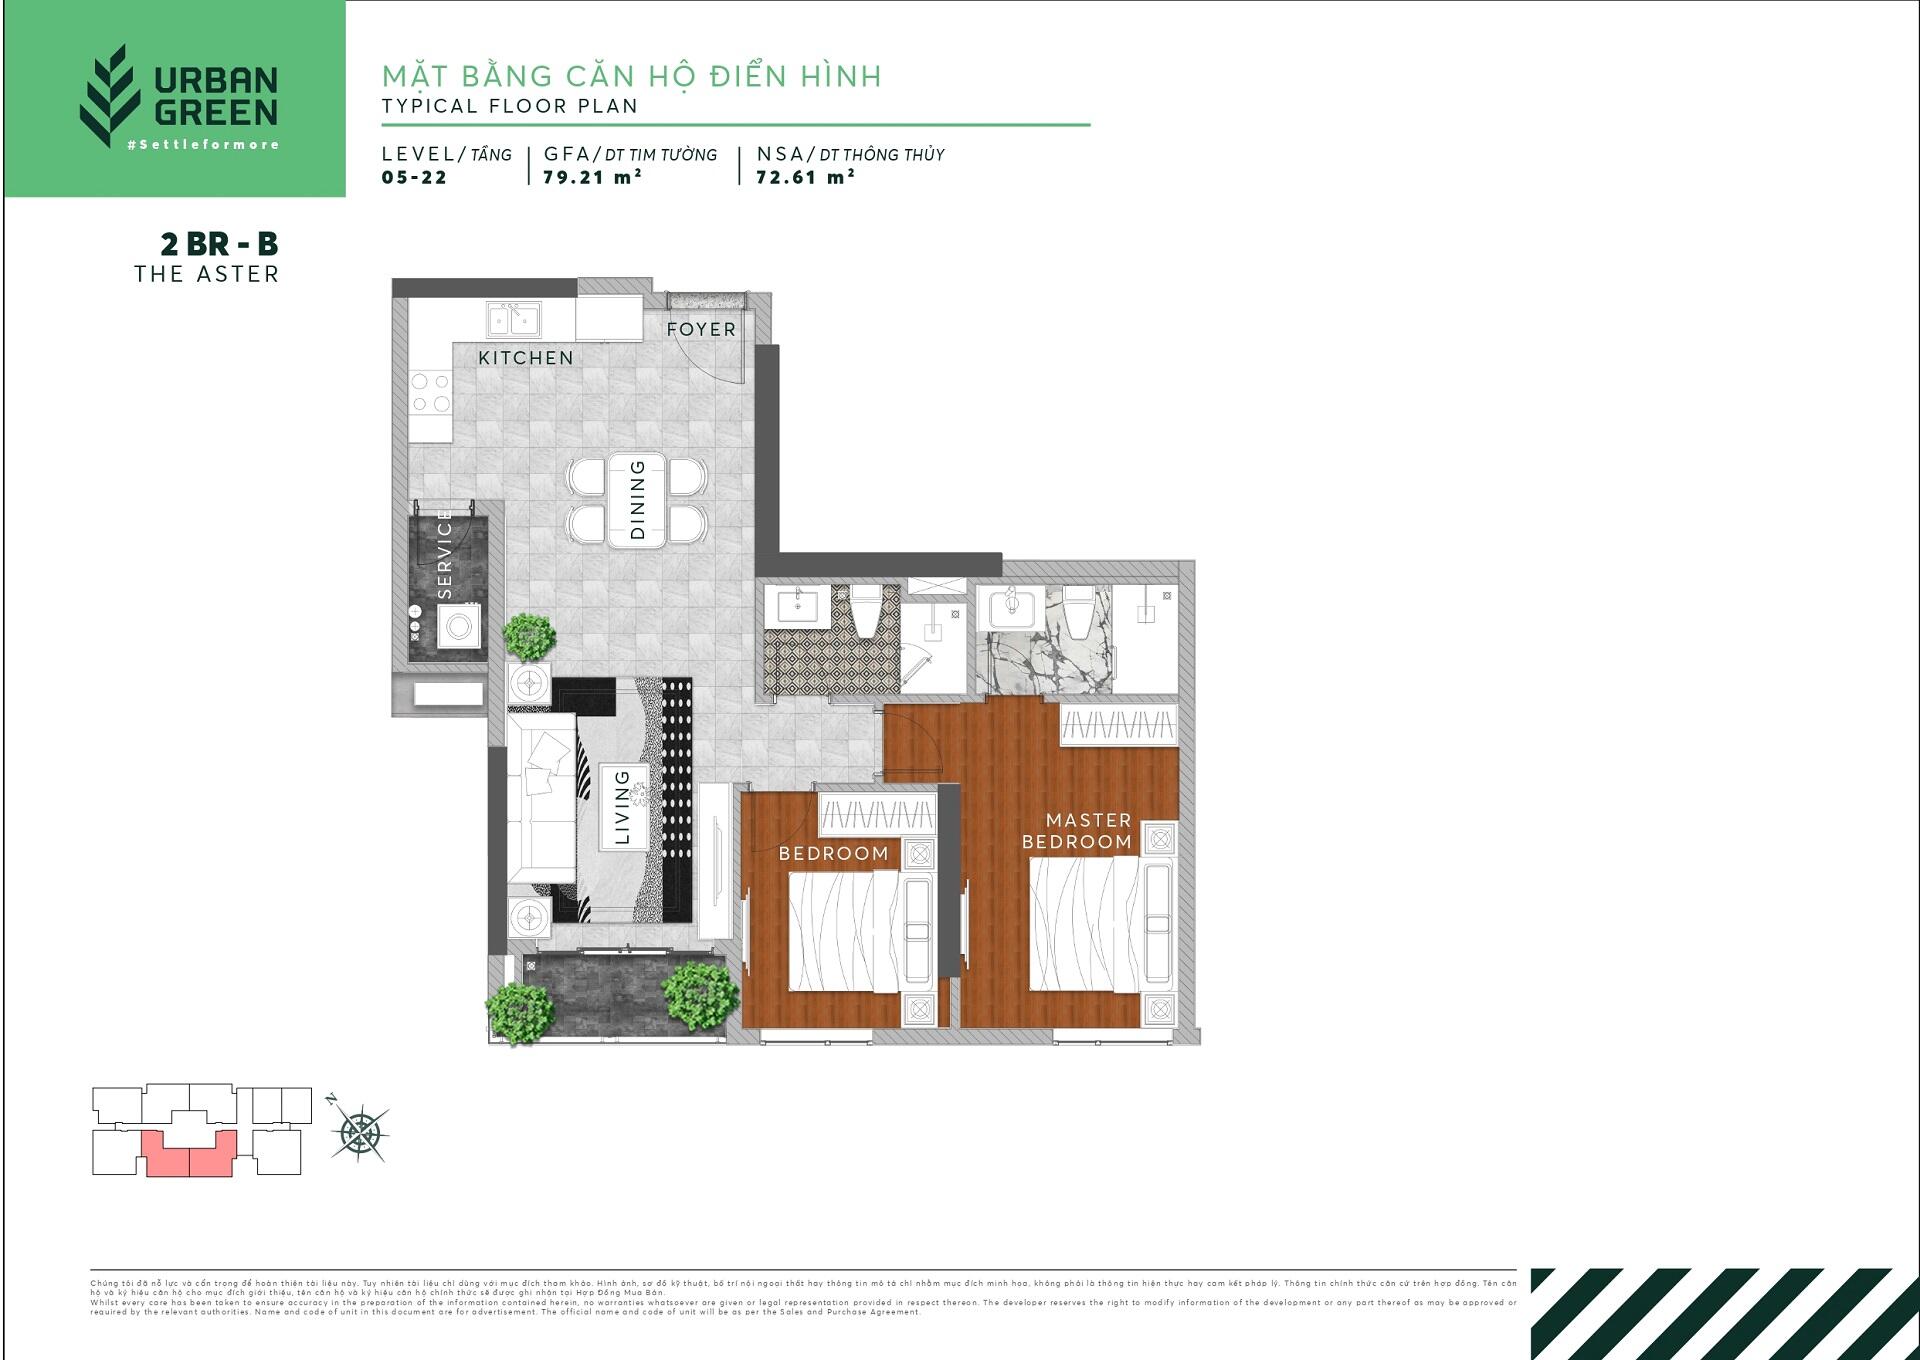 The layout of The Aster apartment 2 bedrooms 2BR - B